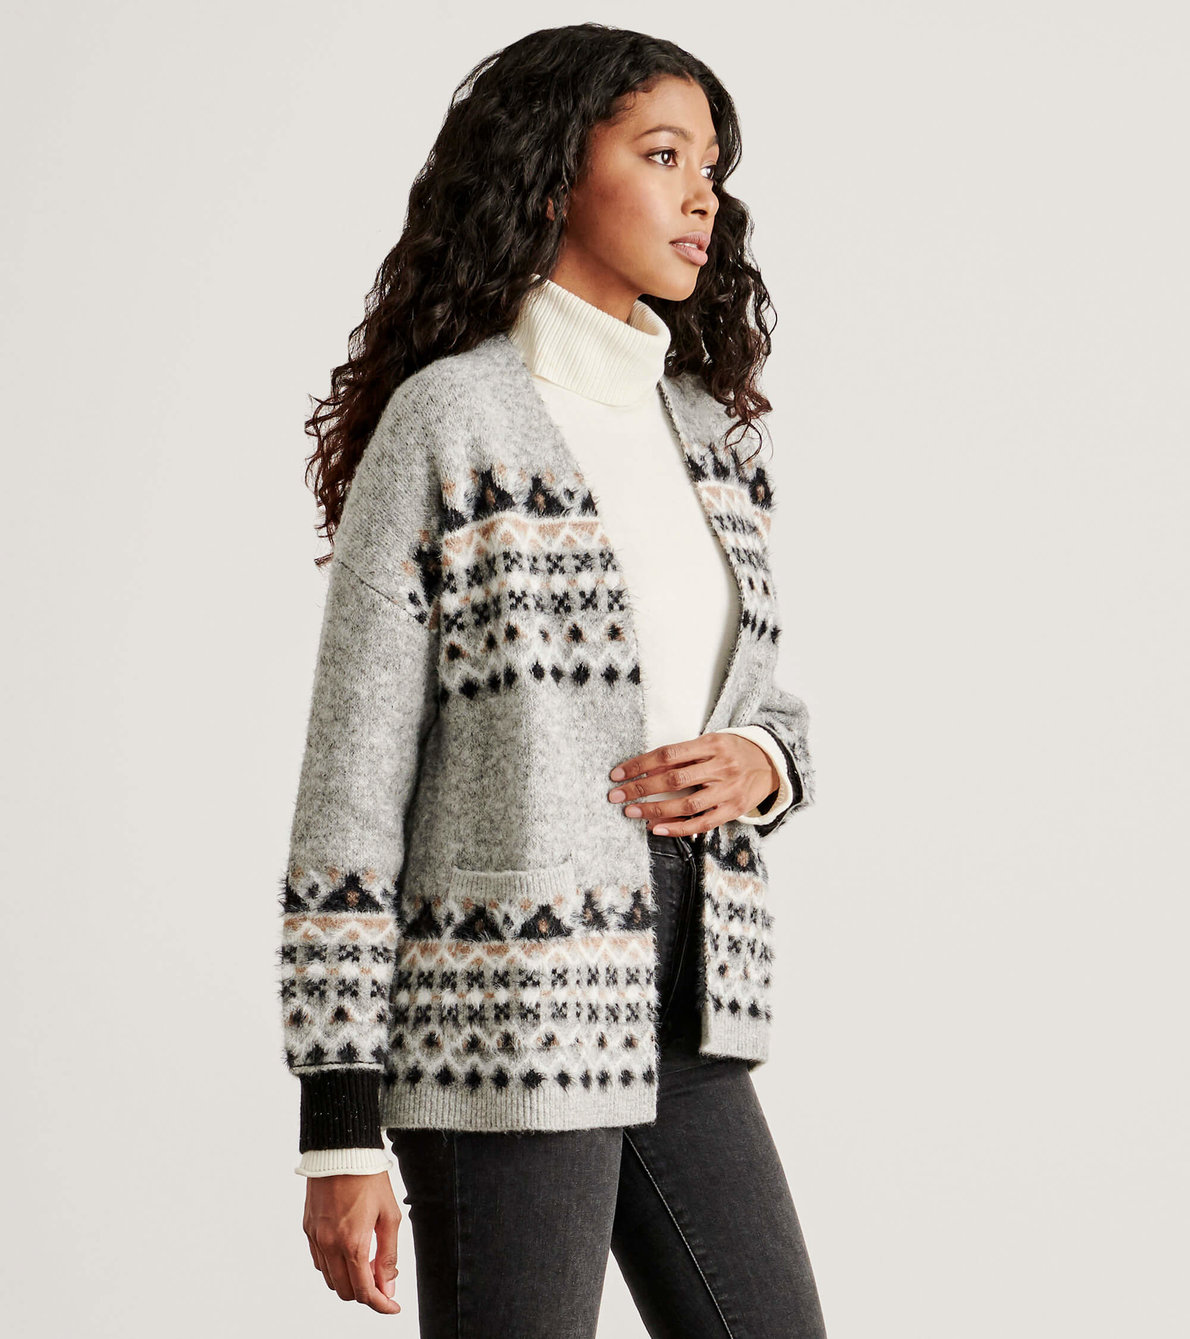 View larger image of Relaxed Cardigan - Light Grey Melange